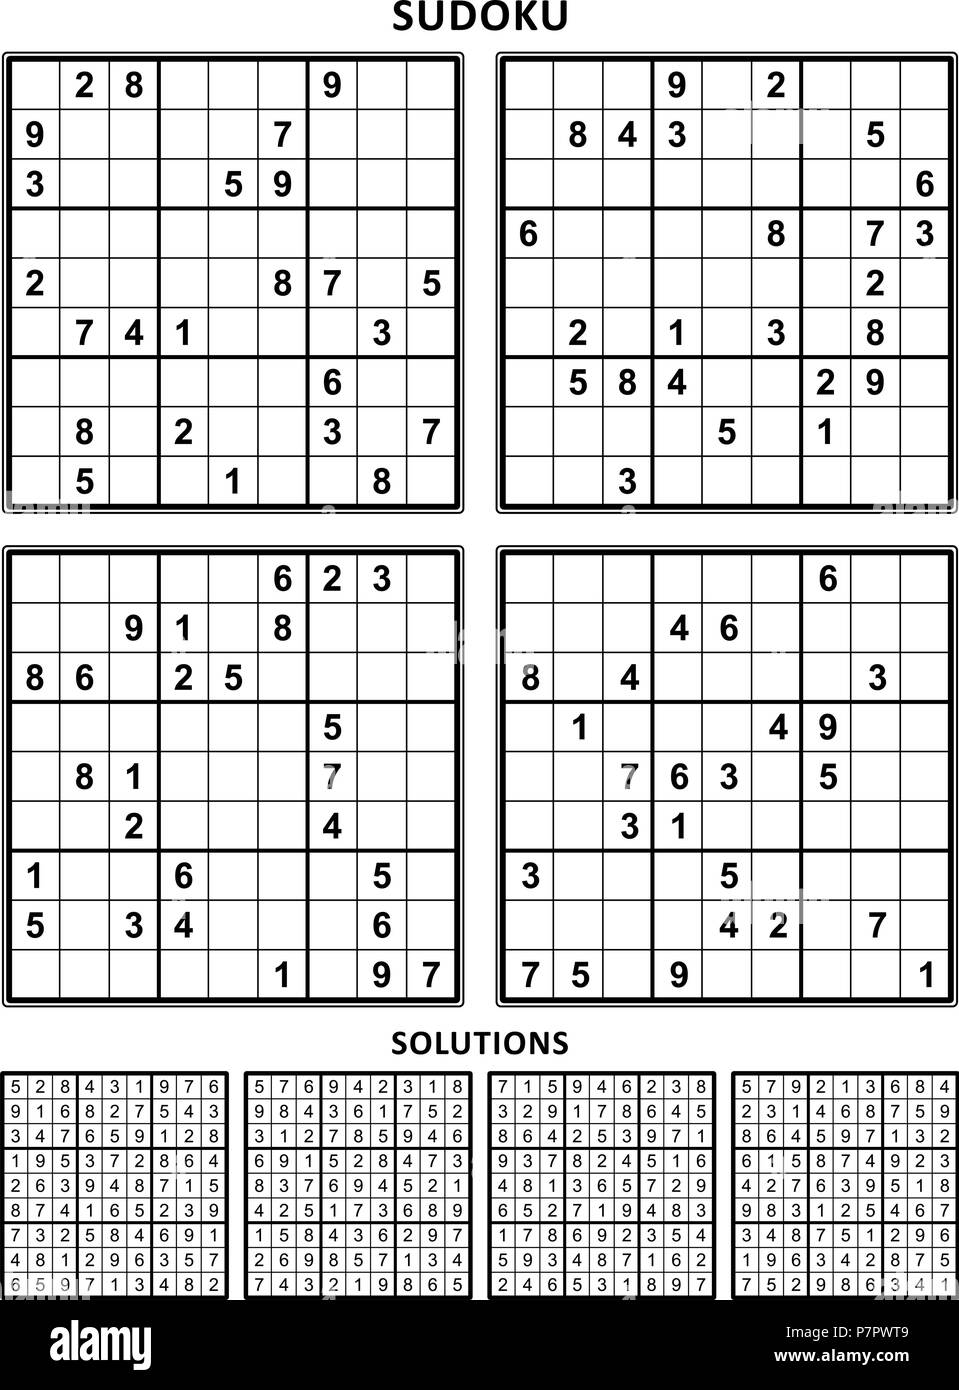 Four sudoku puzzles of comfortable (easy, yet not very easy) level, on A4 or Letter sized page with margins, suitable for large print books. Set 9. Stock Vector